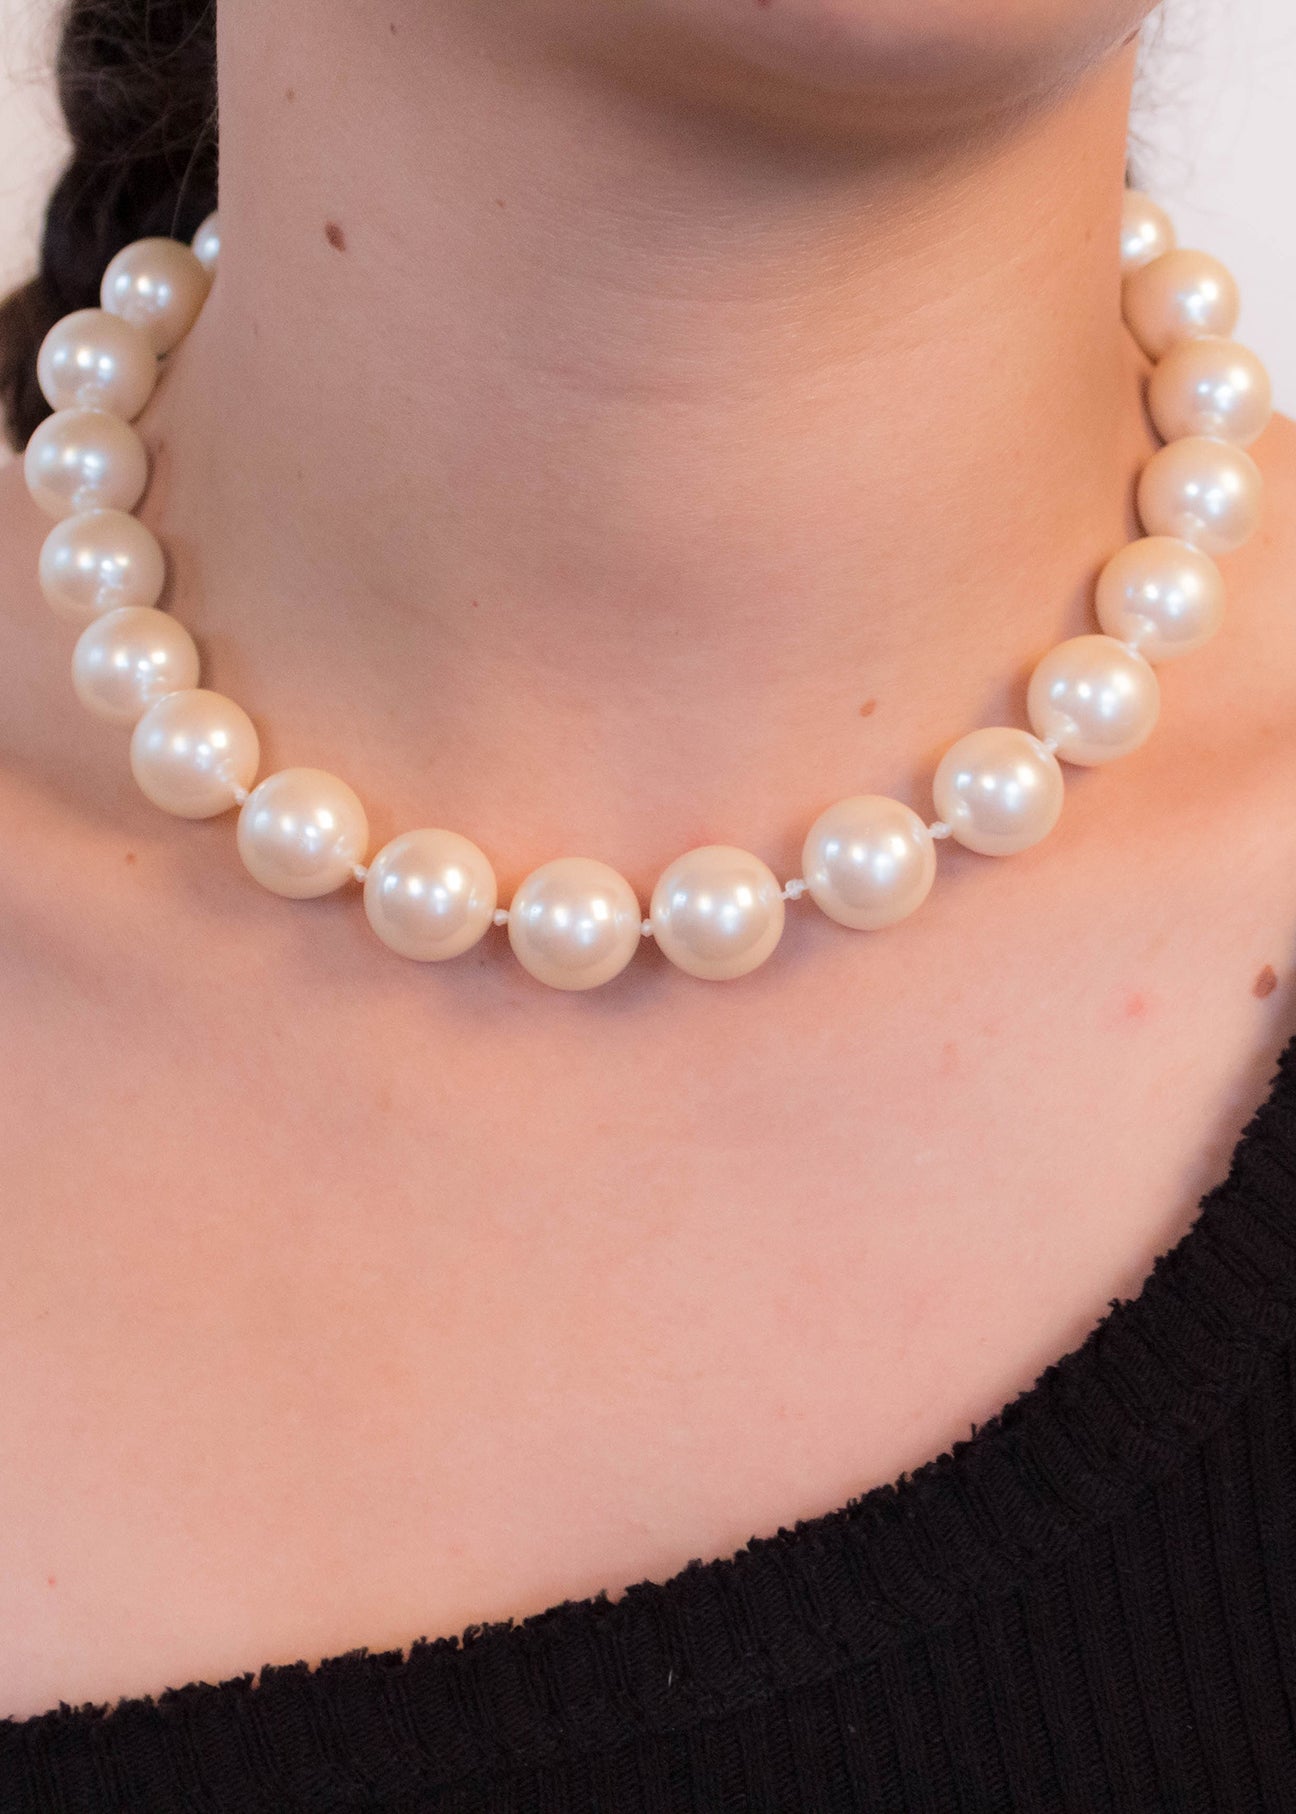 Large Big Pearl Necklace Bracelet and Earring Wedding Faux Pearls Jewelry  Set Multi Strand Simulated Pearl Necklace Chunky Pearls Costume Jewelry for  Women Girls Bride Gift - Walmart.com